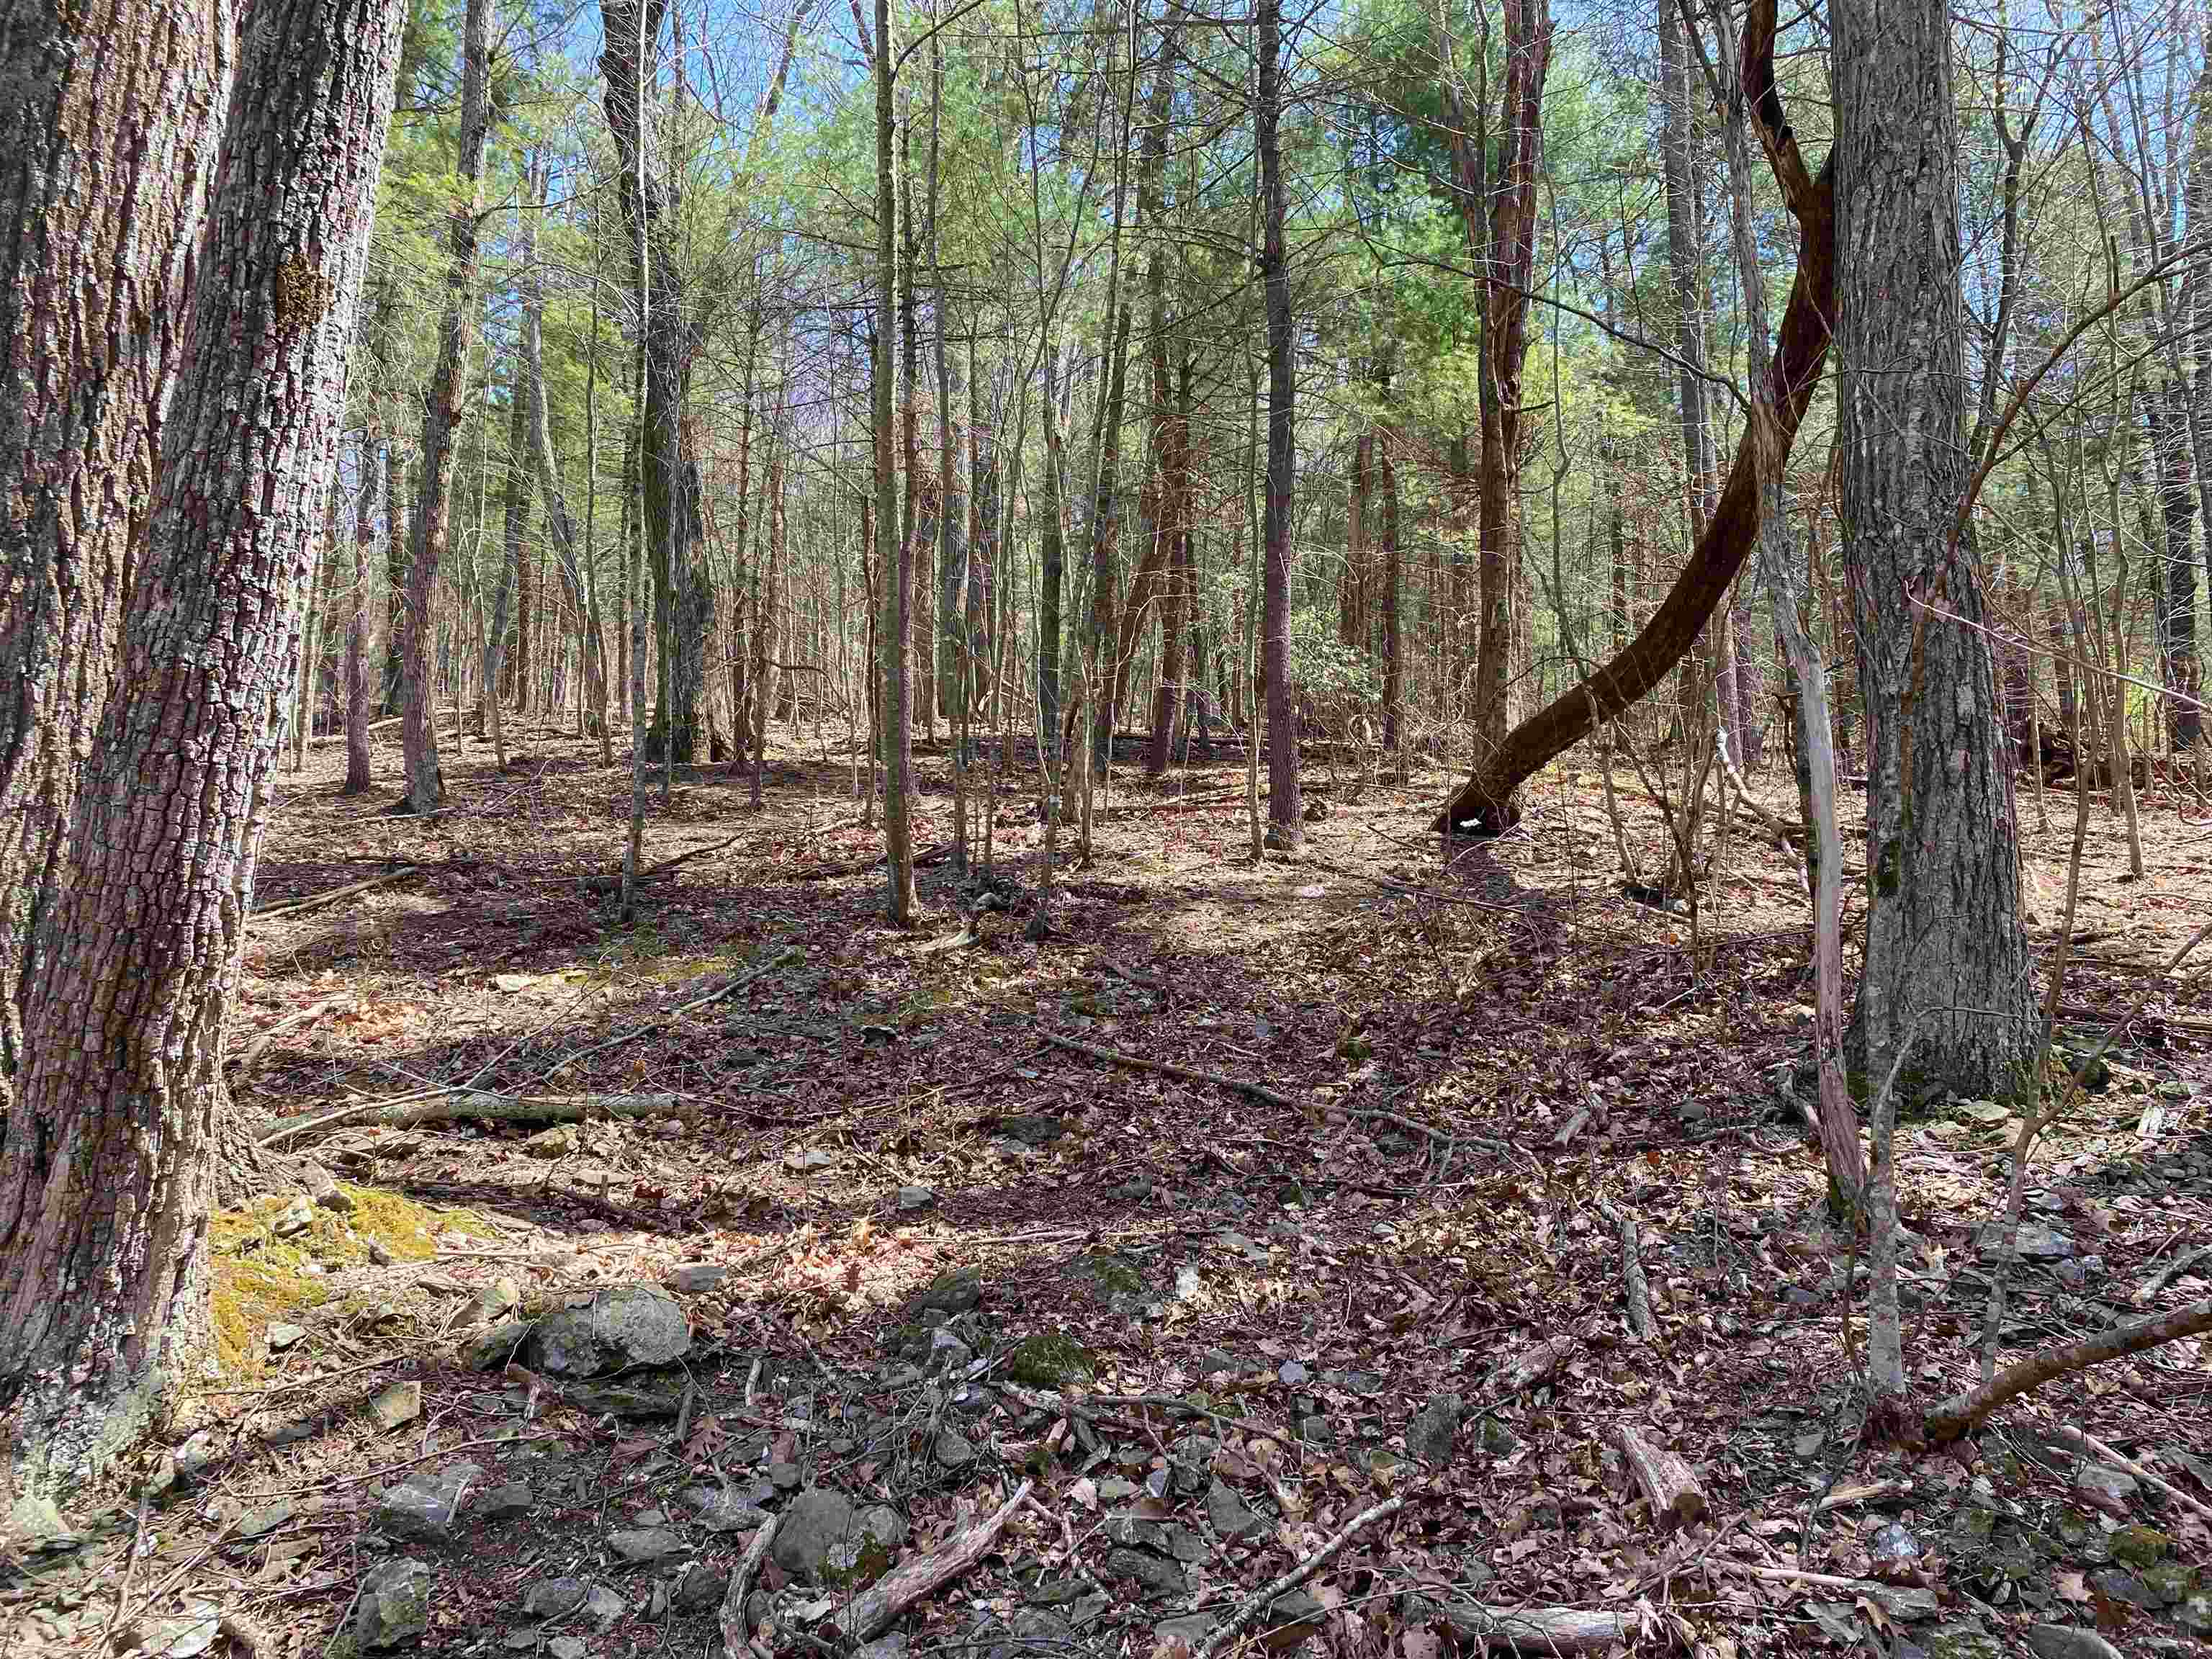 TBD CLIFF HEIGHTS RD, STANLEY, Virginia 22851, ,Land,TBD CLIFF HEIGHTS RD,651955 MLS # 651955